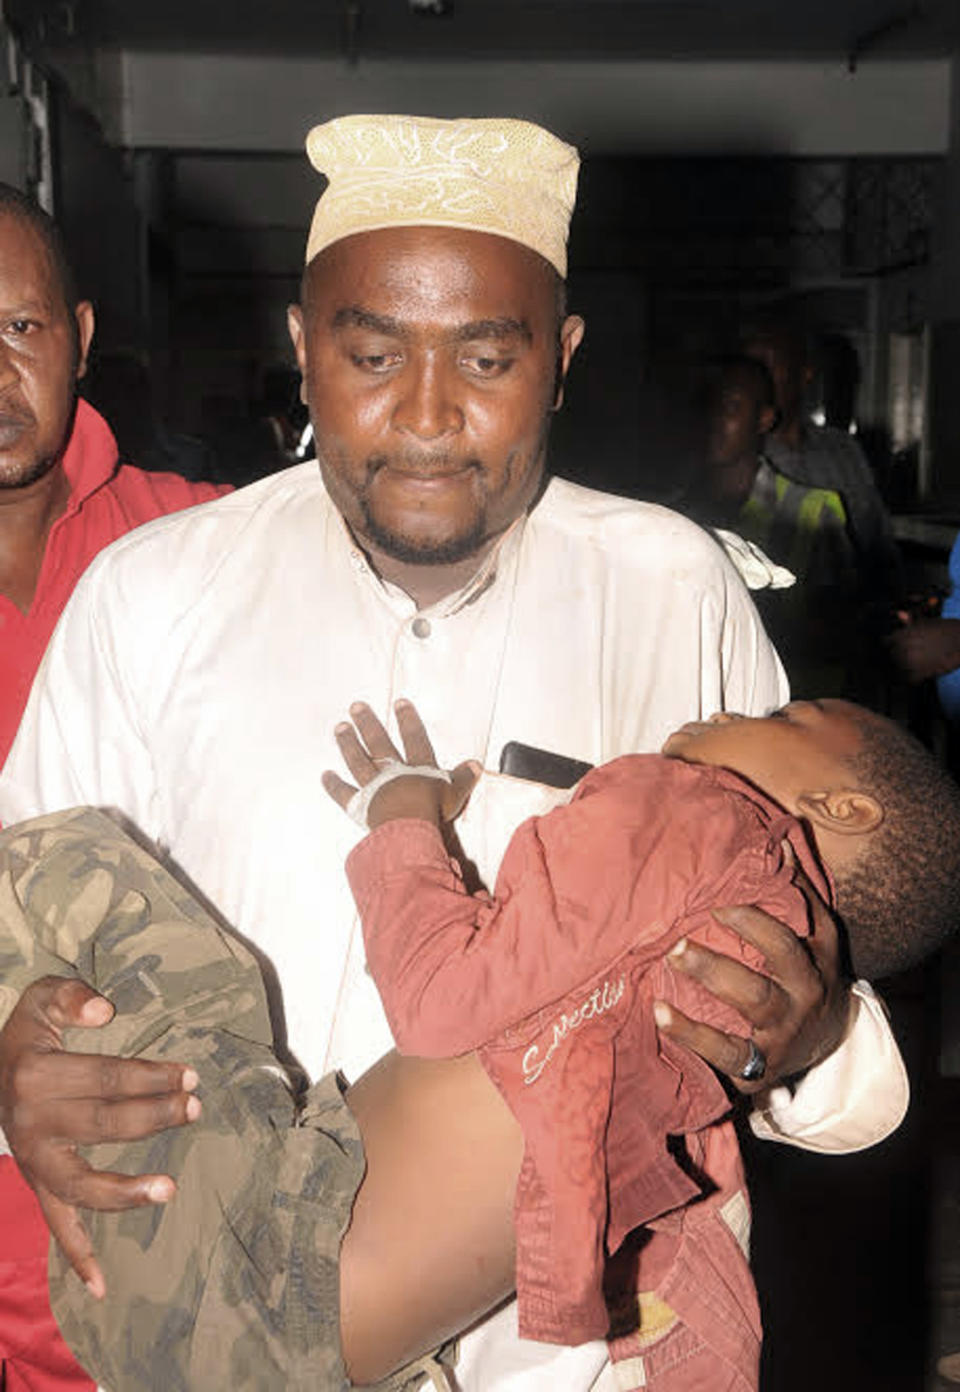 An injured child is carried to hospital in Mombasa Kenya, Saturday, May, 3, 2014. At least three have been confirmed dead and several others injured in twin explosions in the coastal city of Mombasa, Kenya, police said on Saturday. Mombasa Country police commander, Robert Kitur said they have not established the cause of the explosions at Reef Hotel Nyali and Mwembe Tayari in town. (AP Photo)